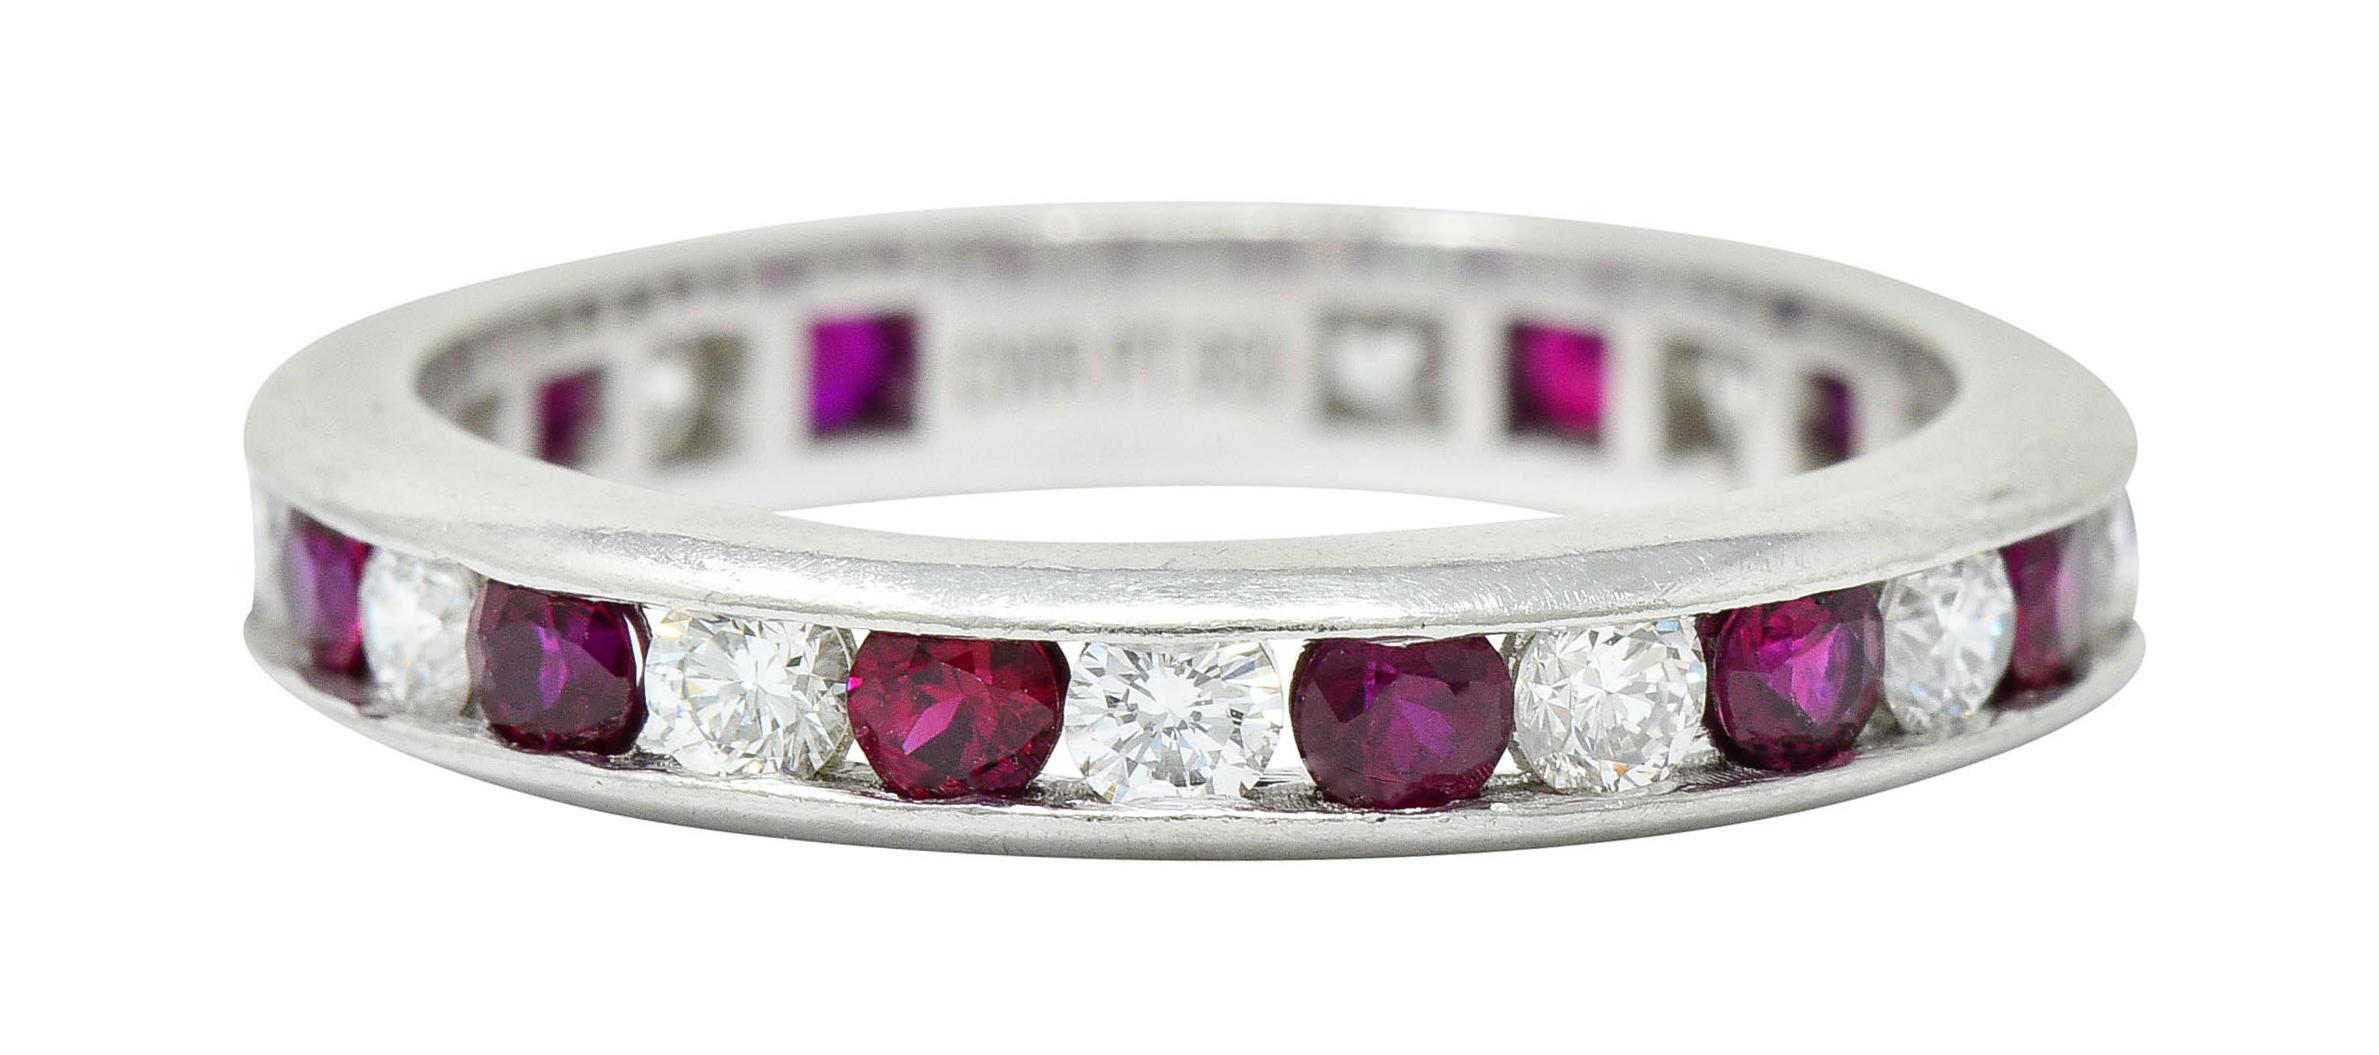 Eternity band ring channel set fully around with diamonds and rubies, alternating

Rubies are well-matched and bright red while weighing in total approximately 0.65 carat

Round brilliant cut diamonds weigh in total approximately 0.91 carat; H to J